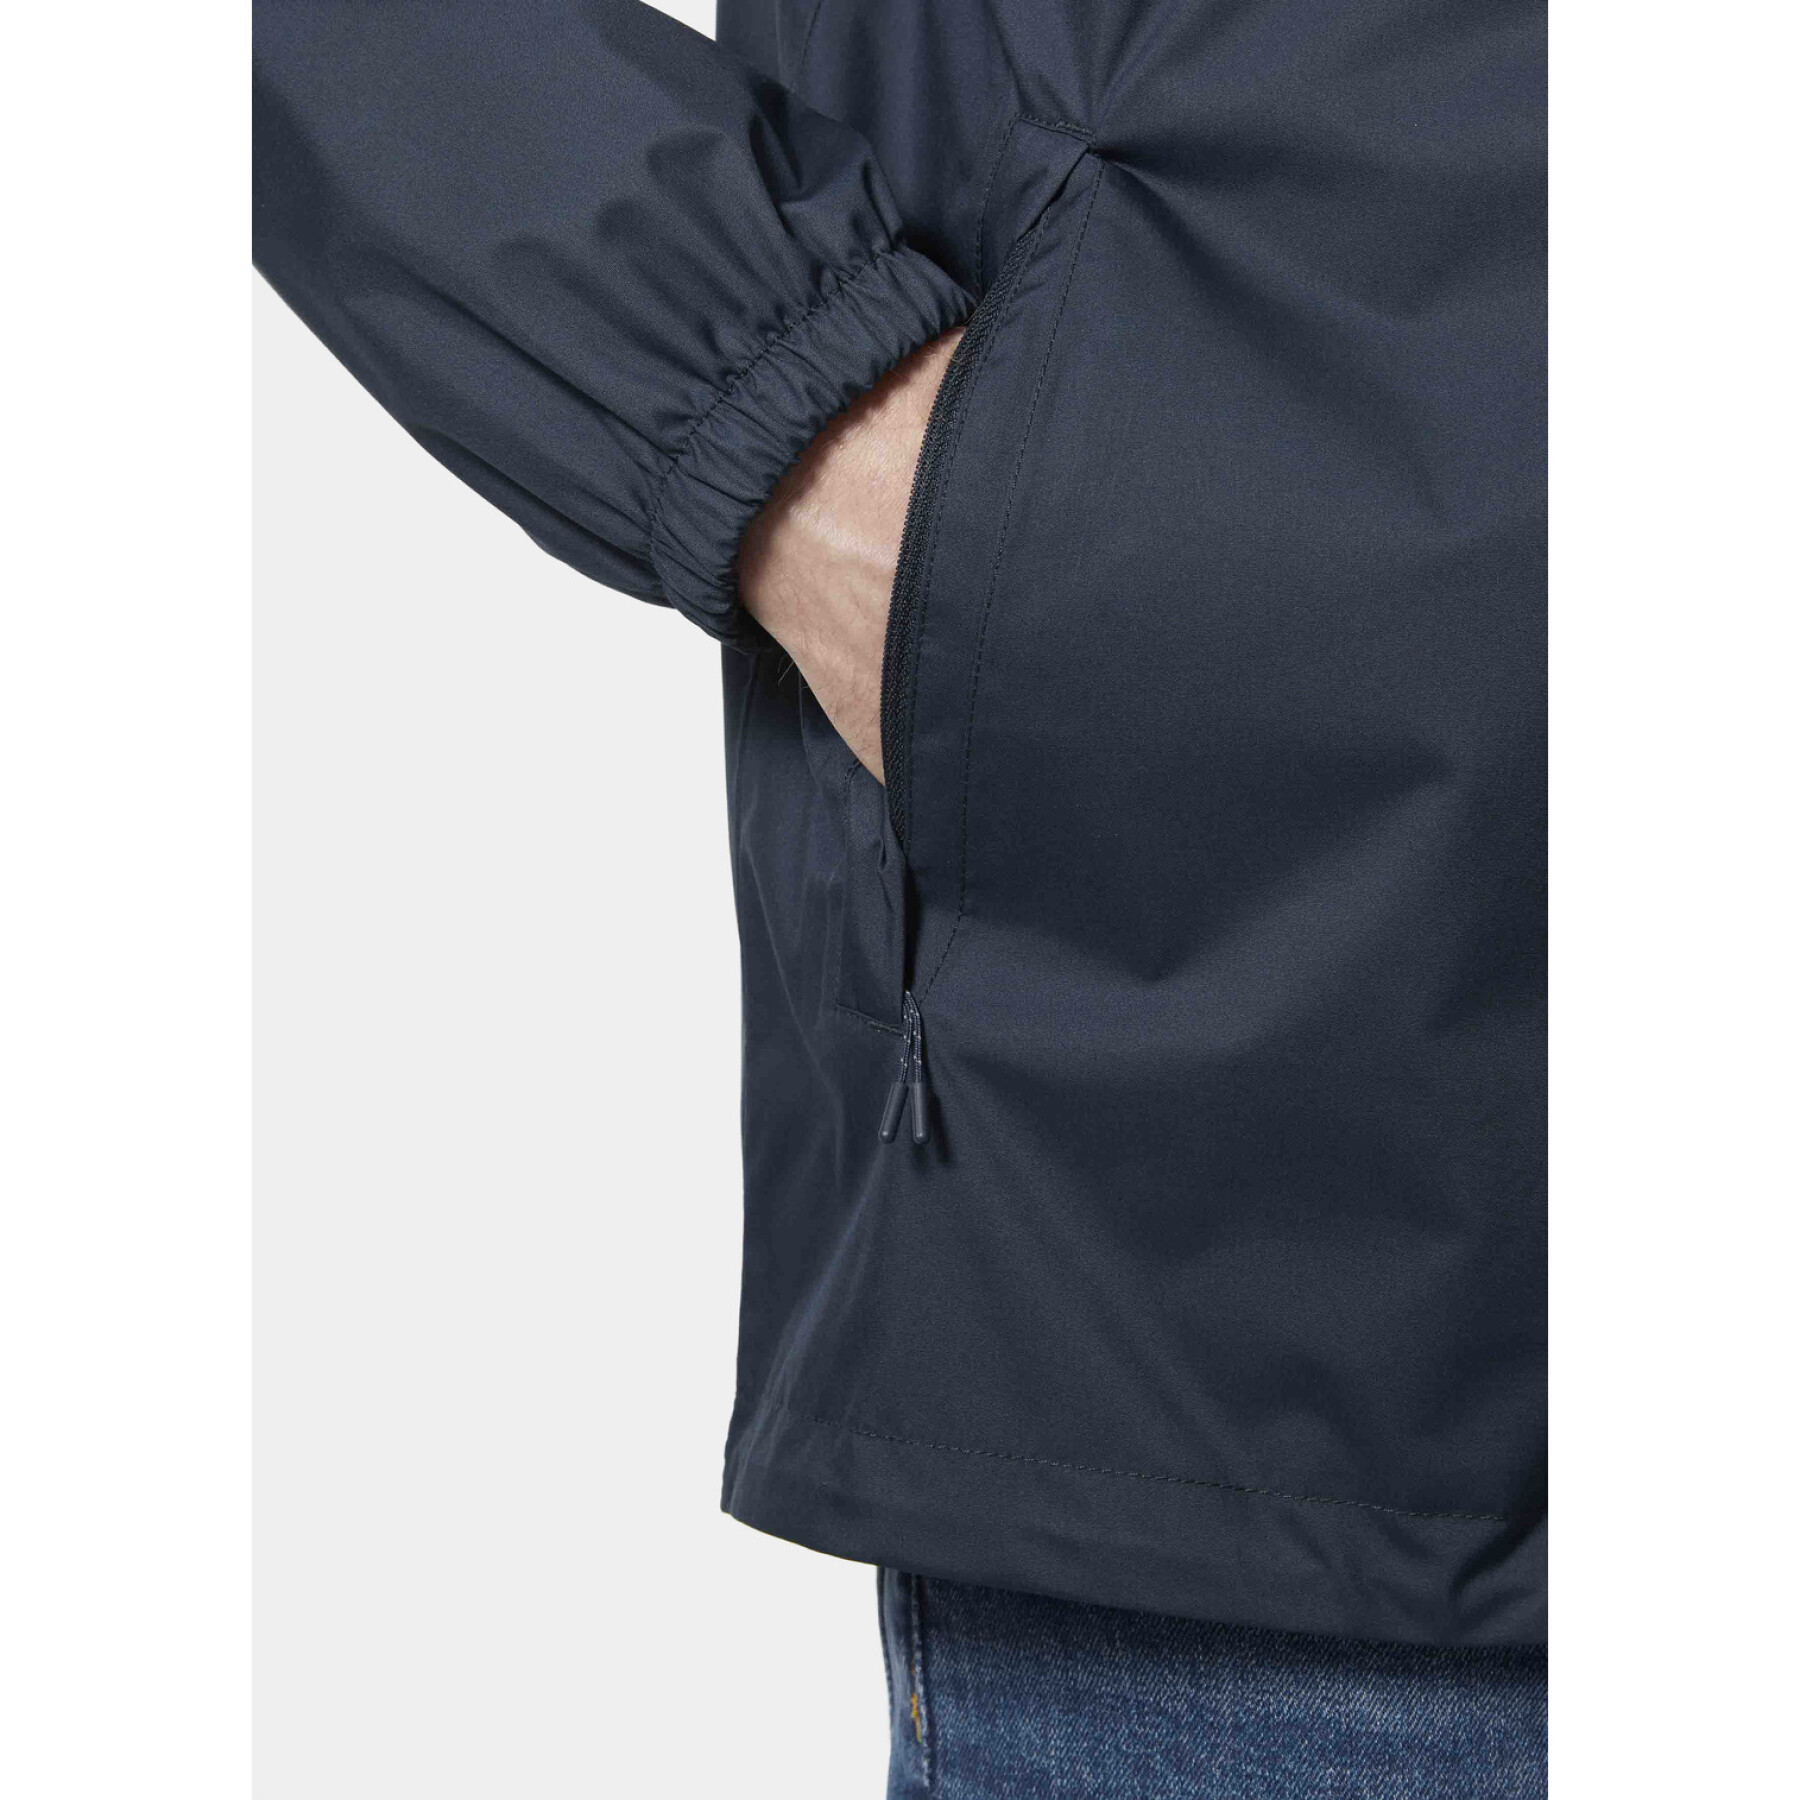 Chaqueta impermeable Helly Hansen Vancouver